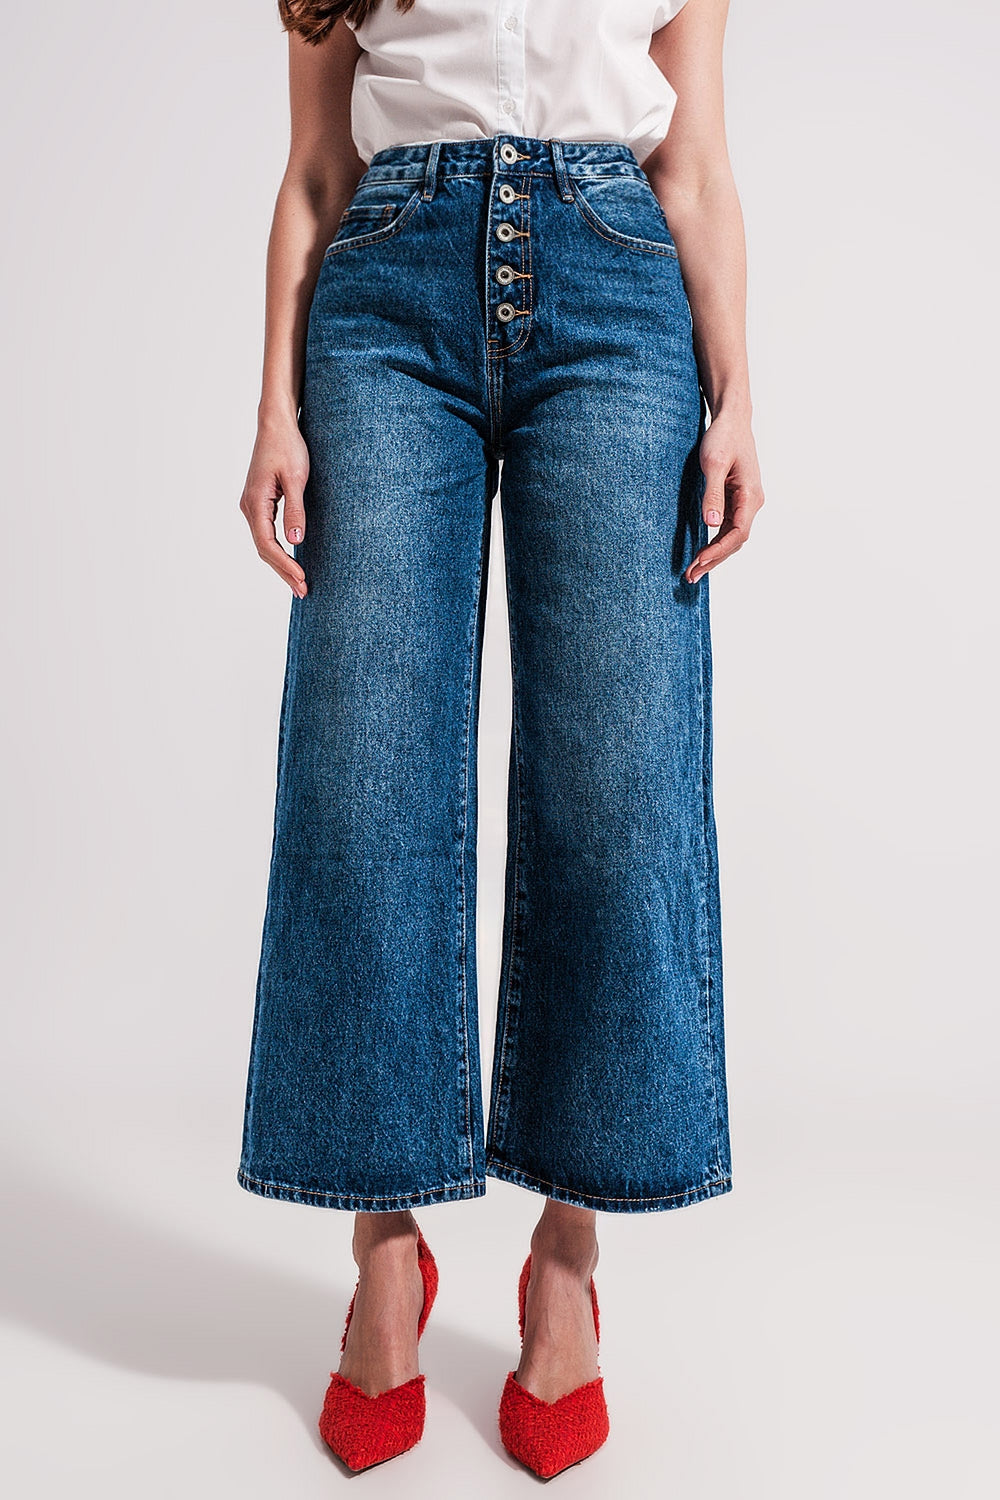 Q2 Wide leg jeans with exposed buttons